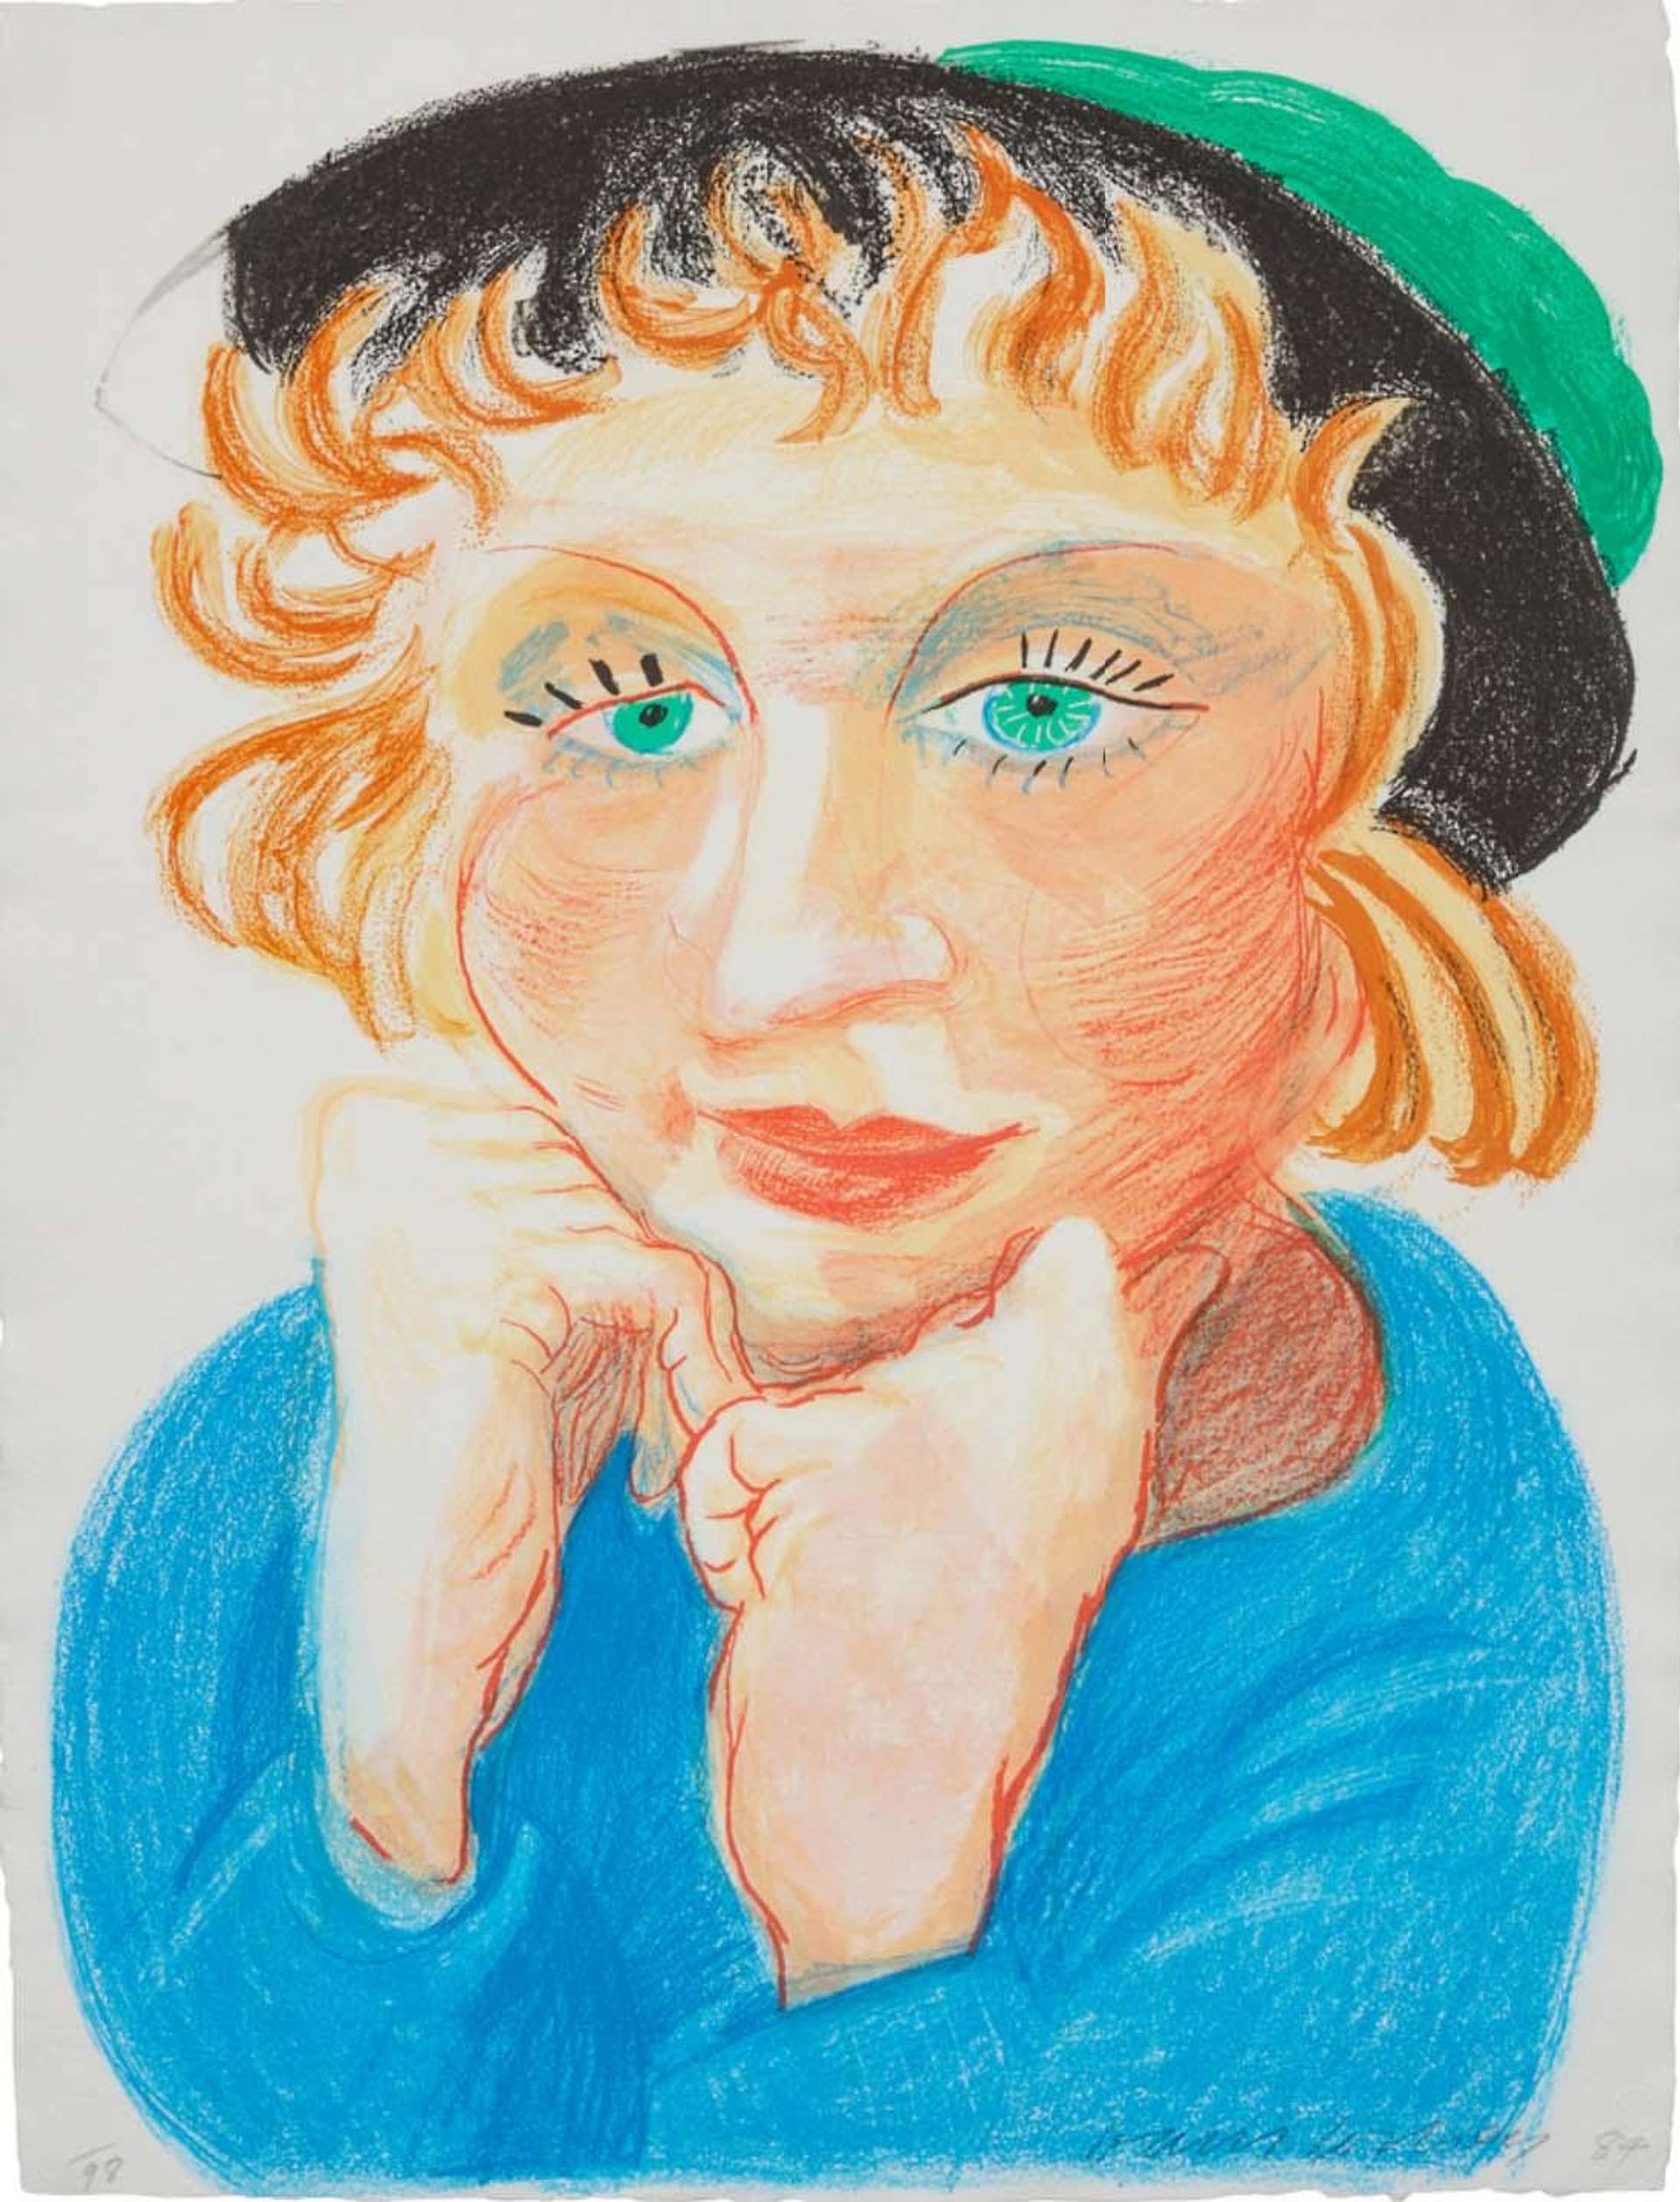 David Hockney’s Celia With Green Hat. A lithographic print of a woman with red hair, green eyes and red lips posed with her face between her hands wearing a blue sweater and green hat. 